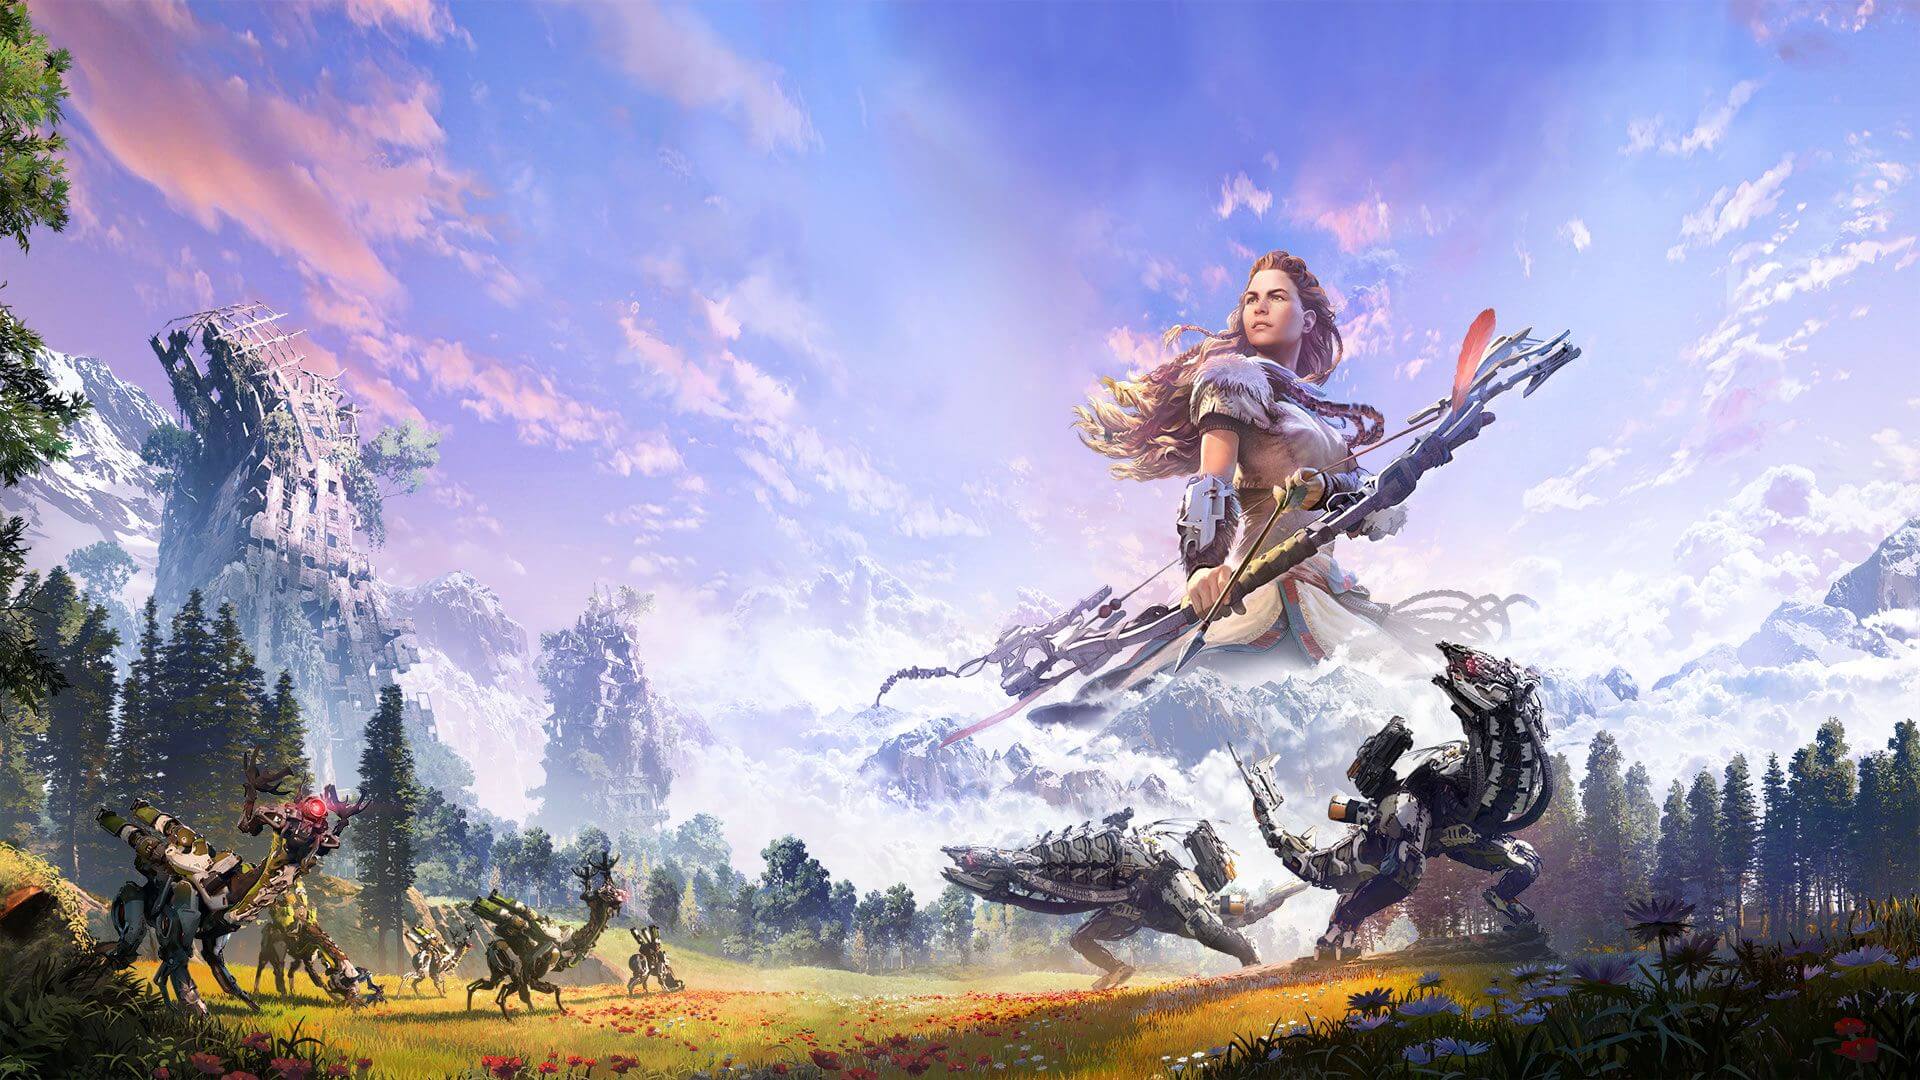 An image from Horizon Zero Dawn featuring Aloy, the main character in the game